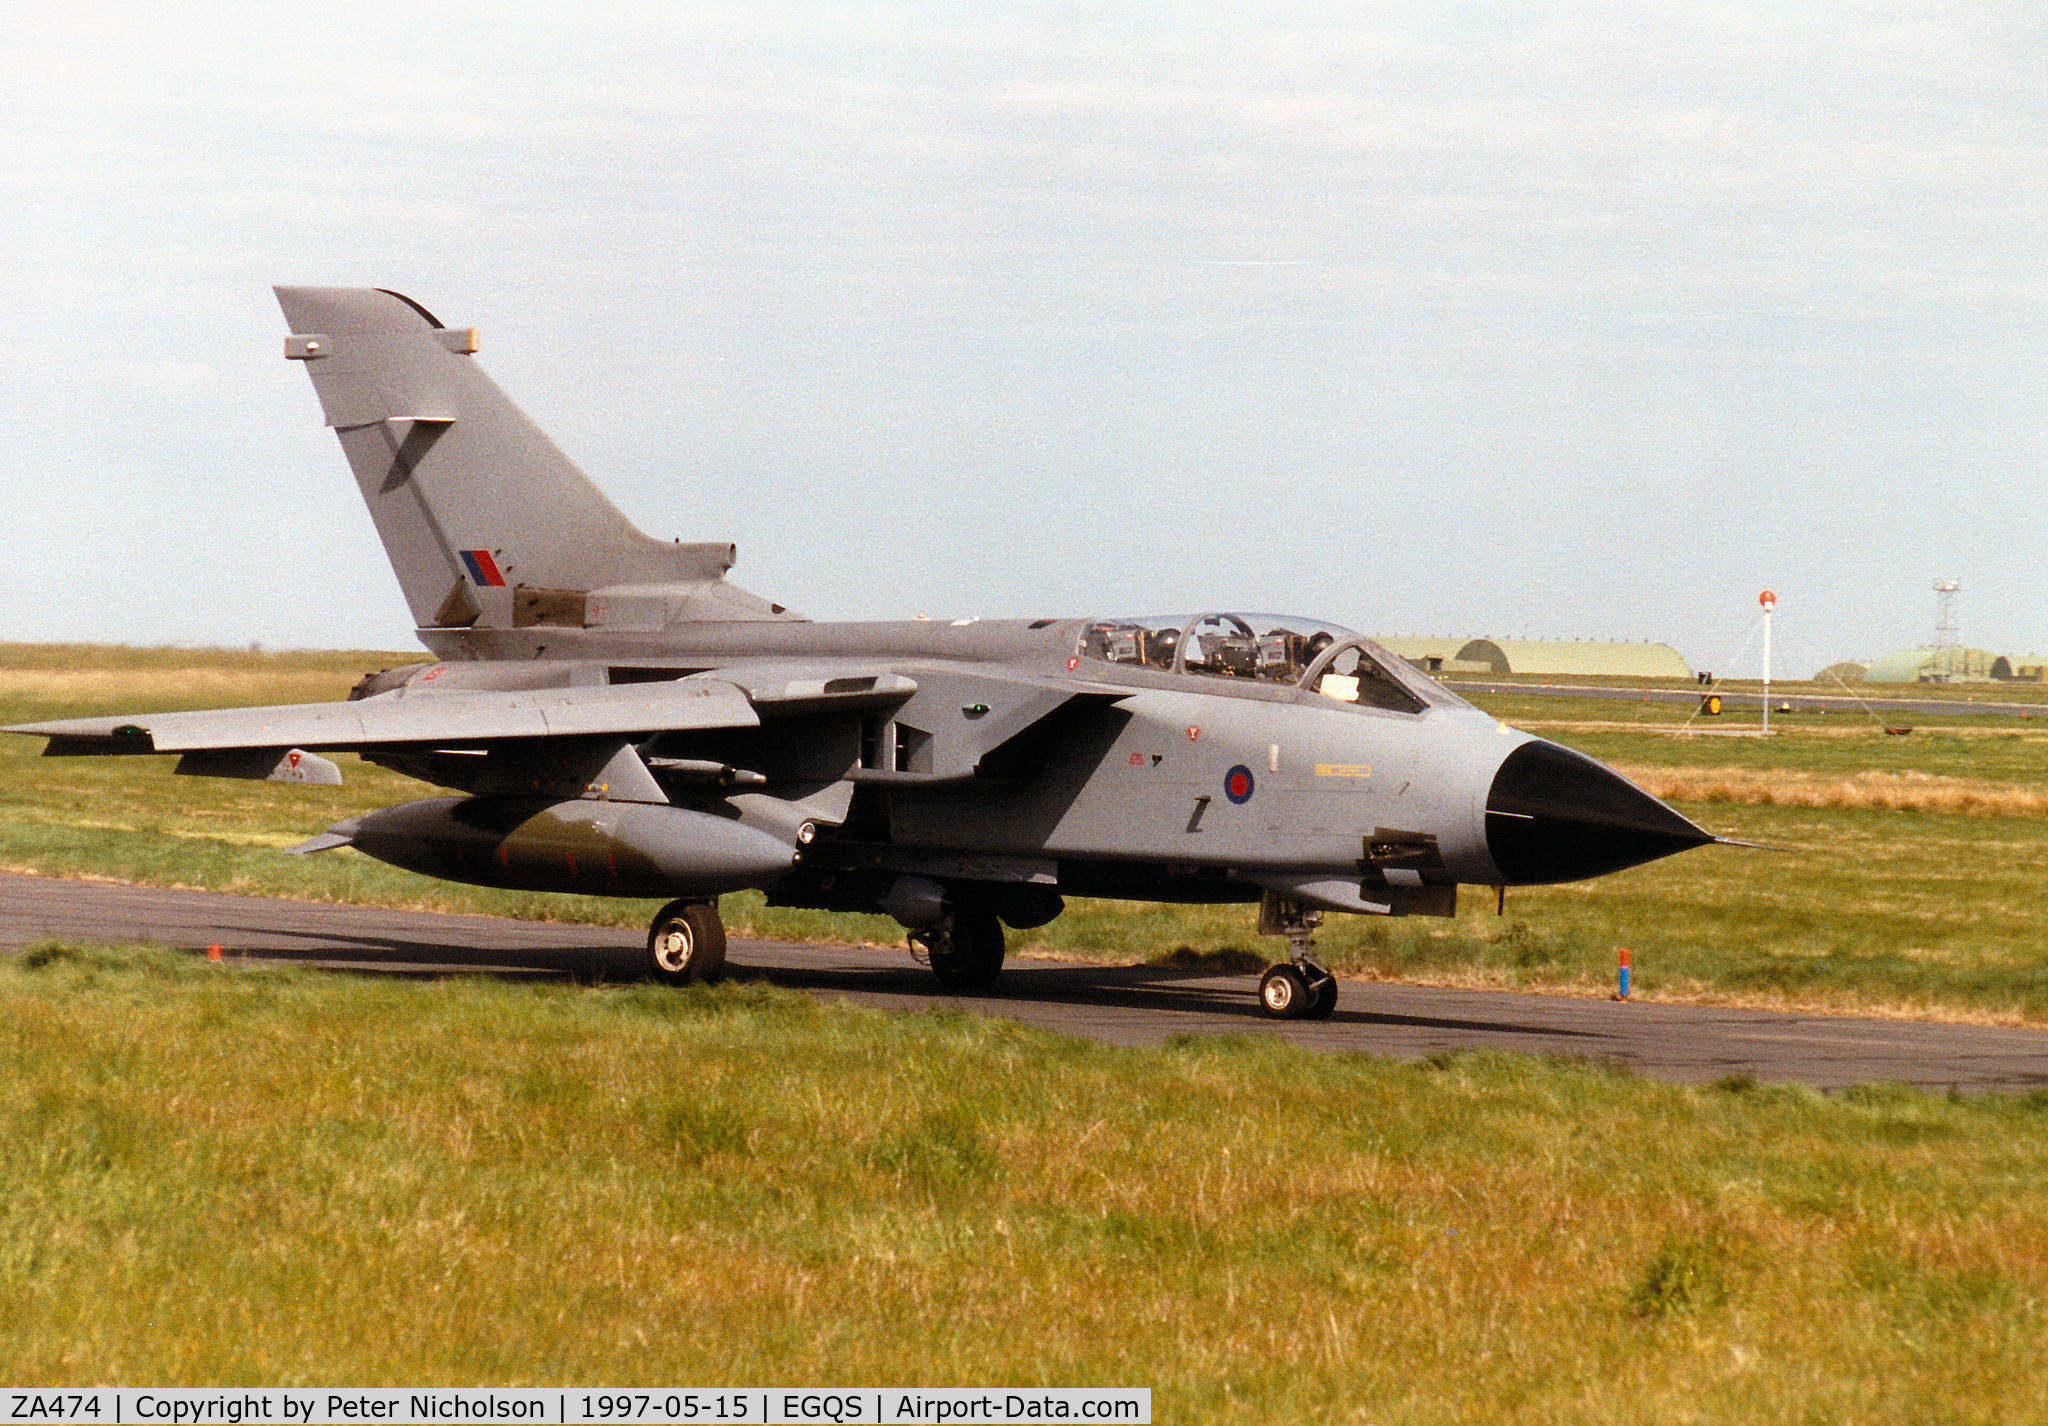 ZA474, 1983 Panavia Tornado GR.1B C/N 300/BS104/3140, Tornado GR.1B, callsign Jackal 1, of 12 Squadron taxying to Runway 05 at RAF Lossiemouth in the Summer of 1997.